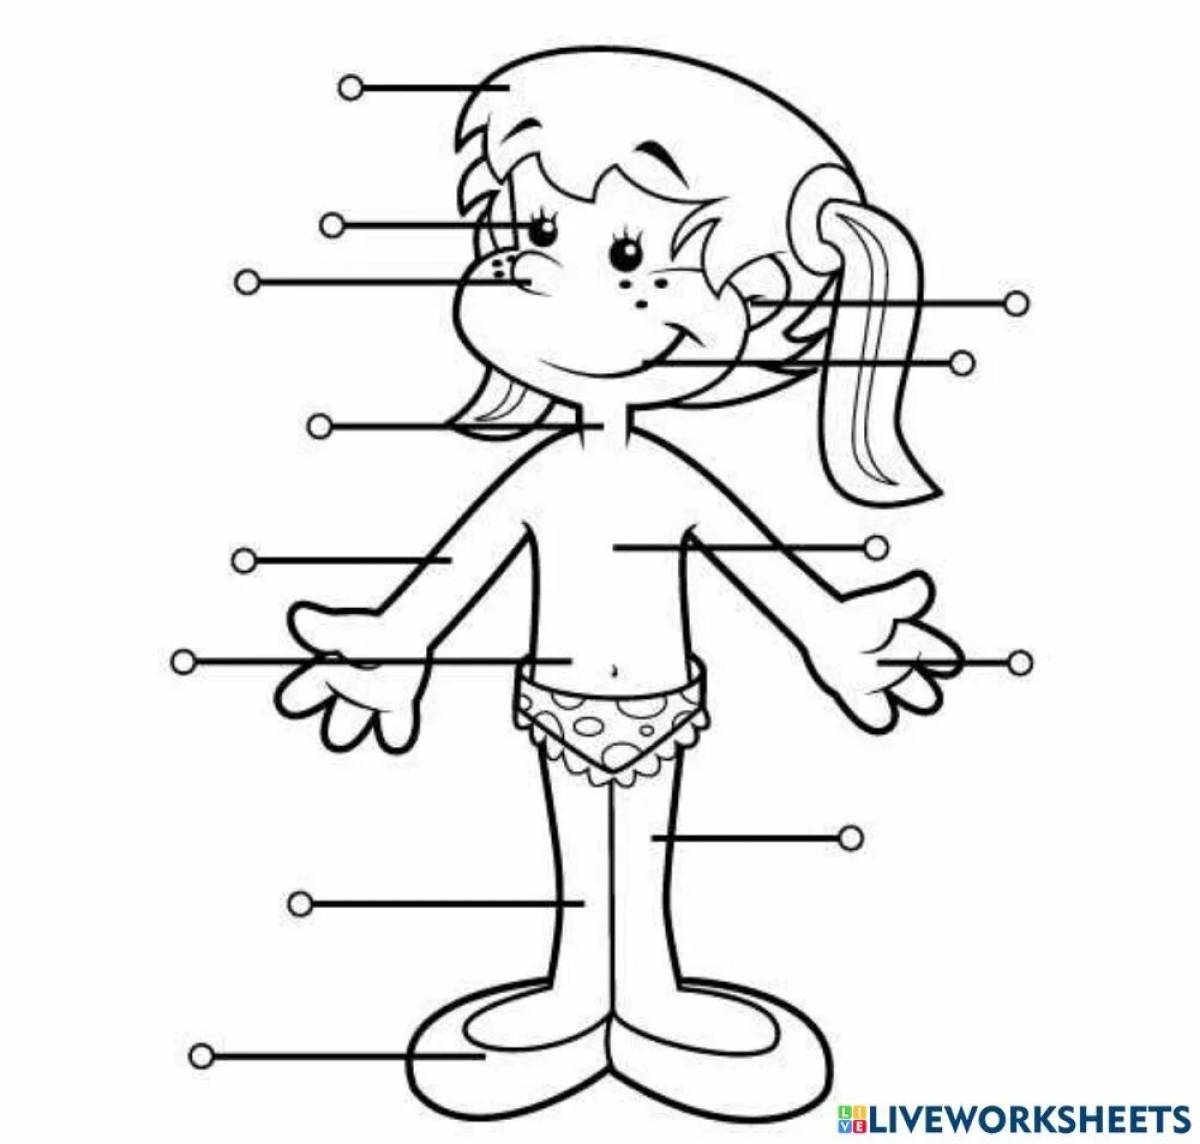 Colorful human structure coloring page for juniors